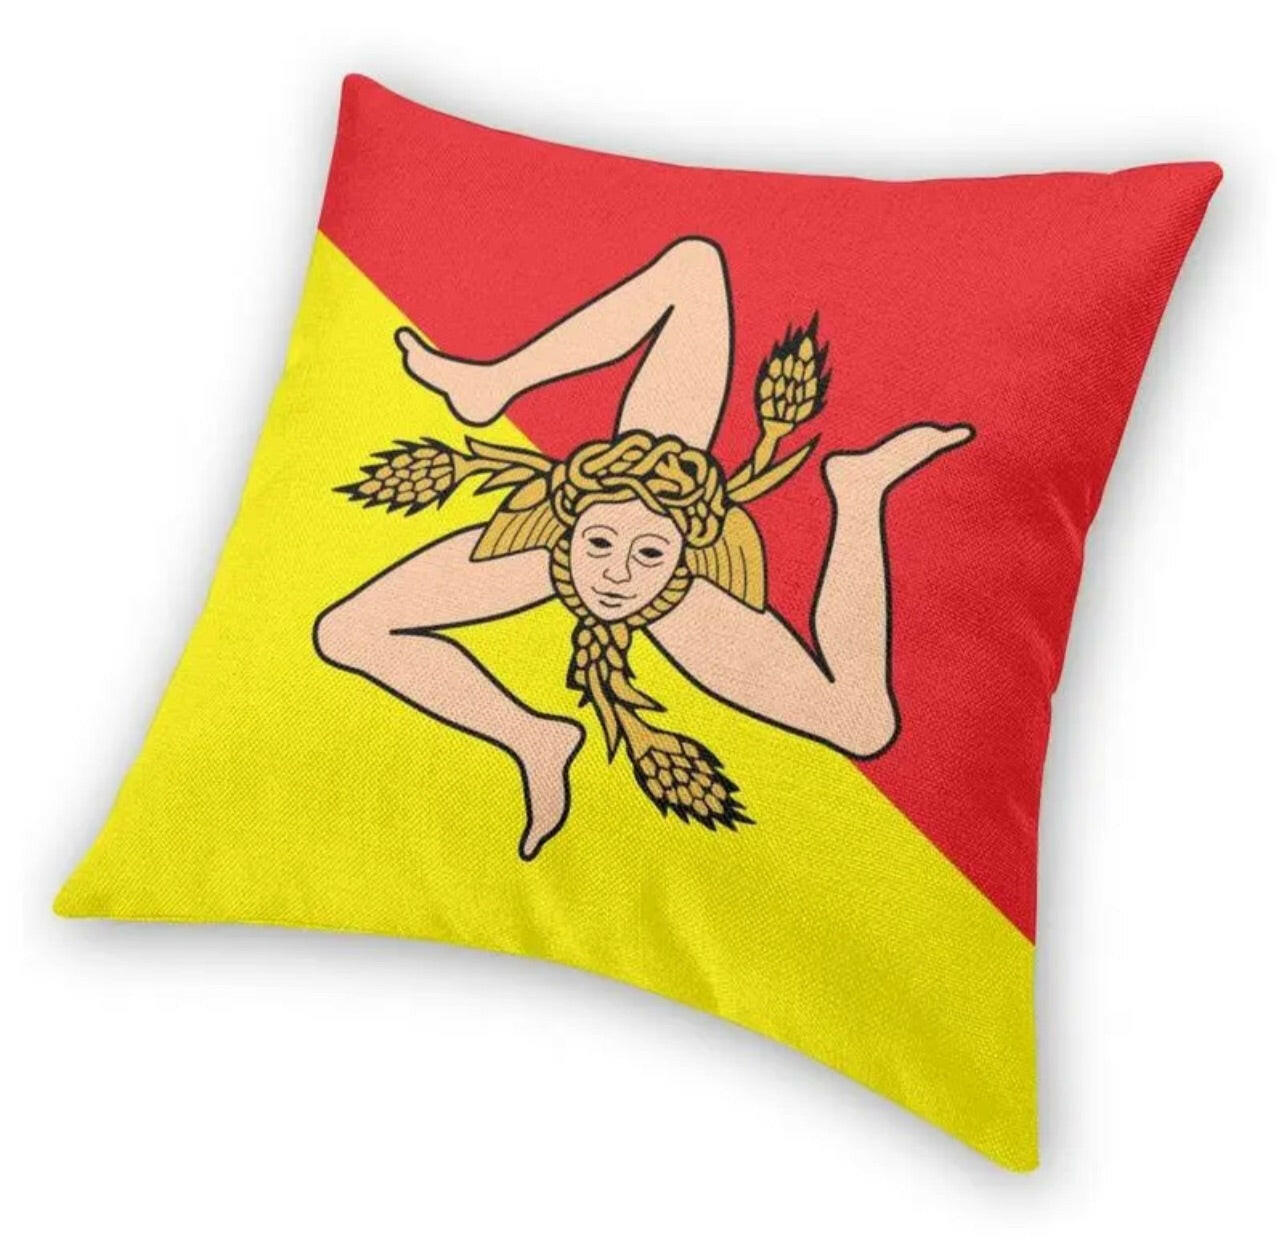 Sicilian Cushion Cover - Sicilian Pillow Cover (Pillow insert not included).